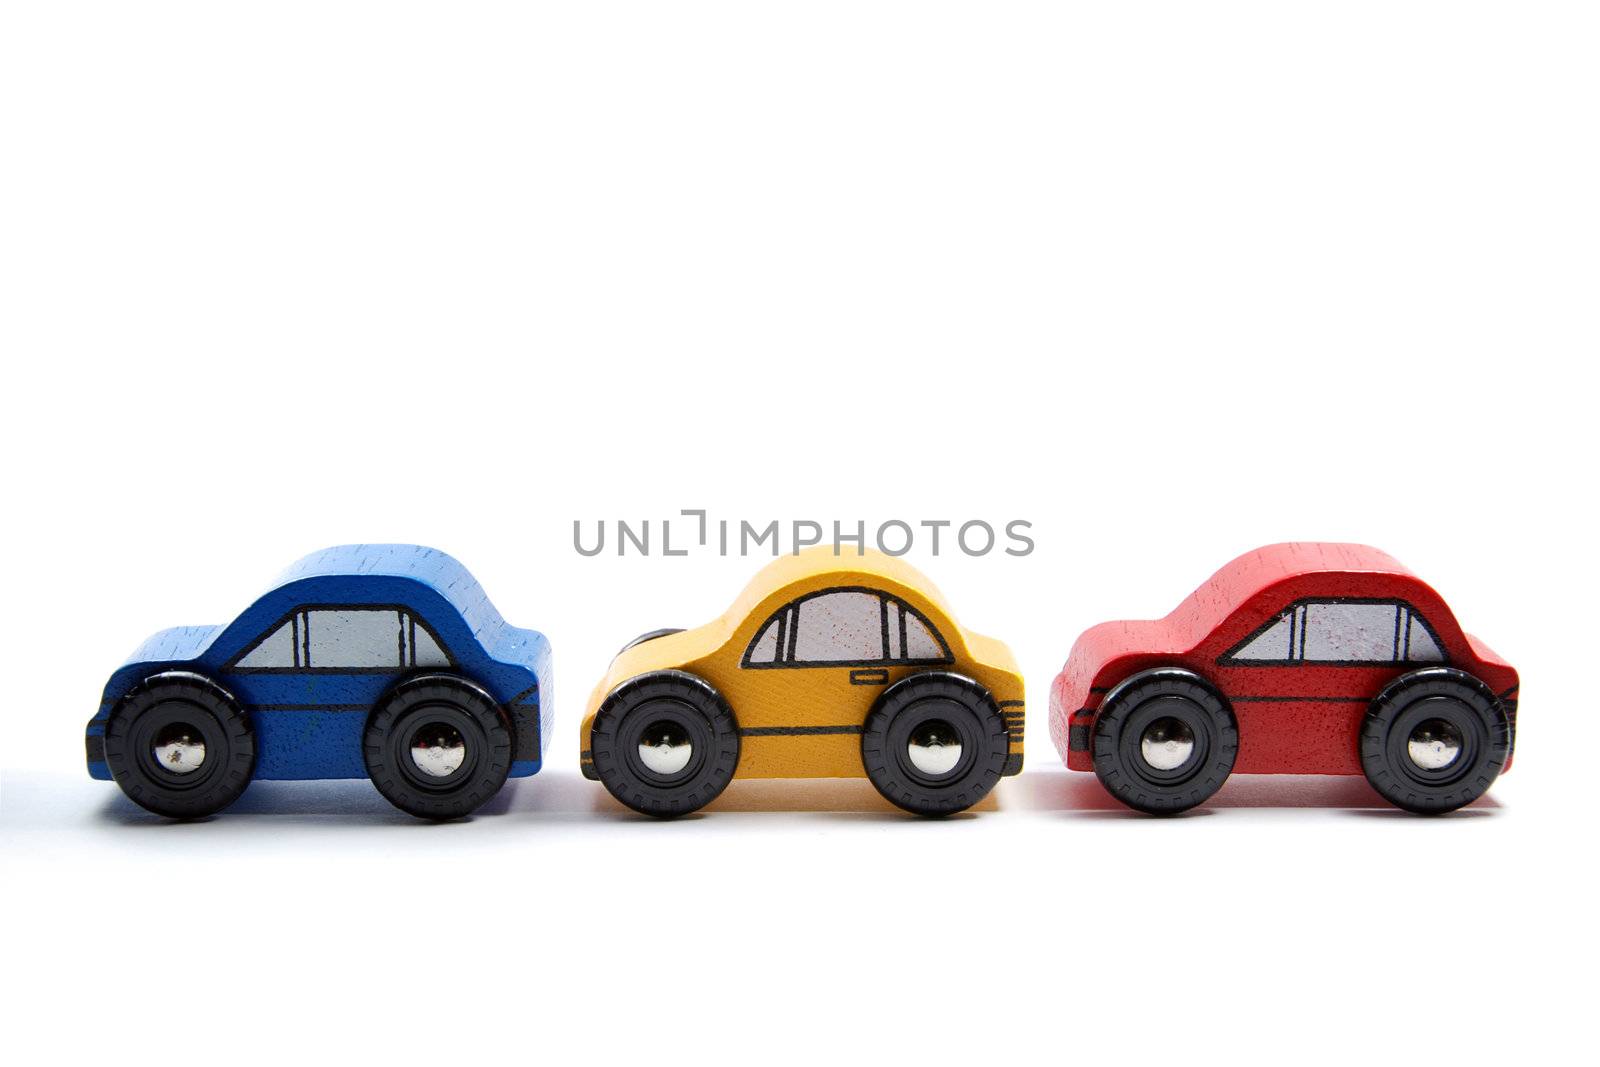 Three simple wooden toy cars in a row, against a white background.